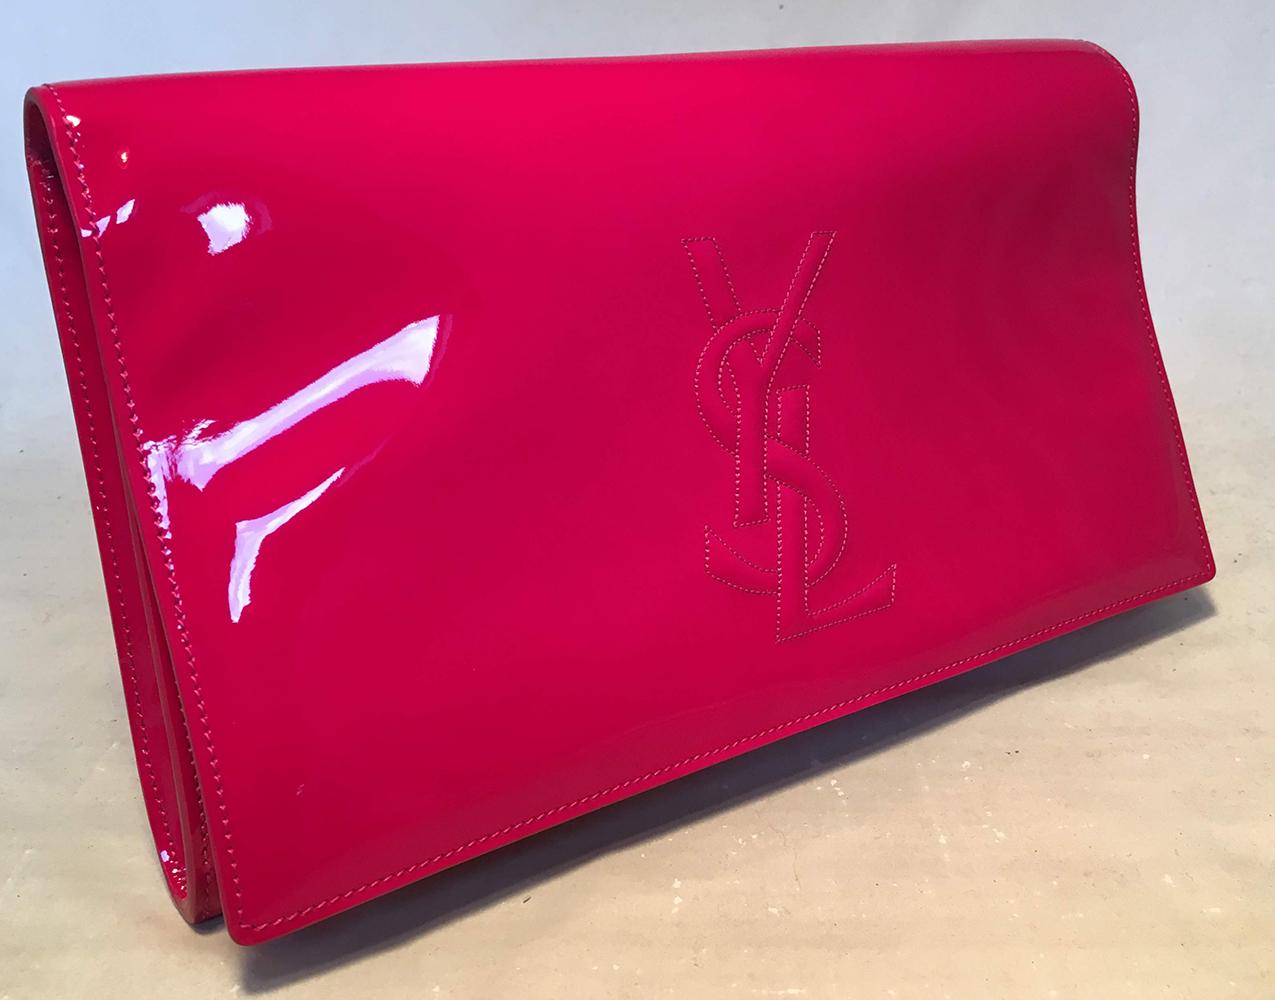 YSL Yves Saint Laurent Hot Pink Patent Leather Clutch in very good condition. hot pink patent leather with embossed YSL logo on front. Snap flap closure opens to a pink satin interior with one slit pocket. No smells or scuffs, clean corners edges